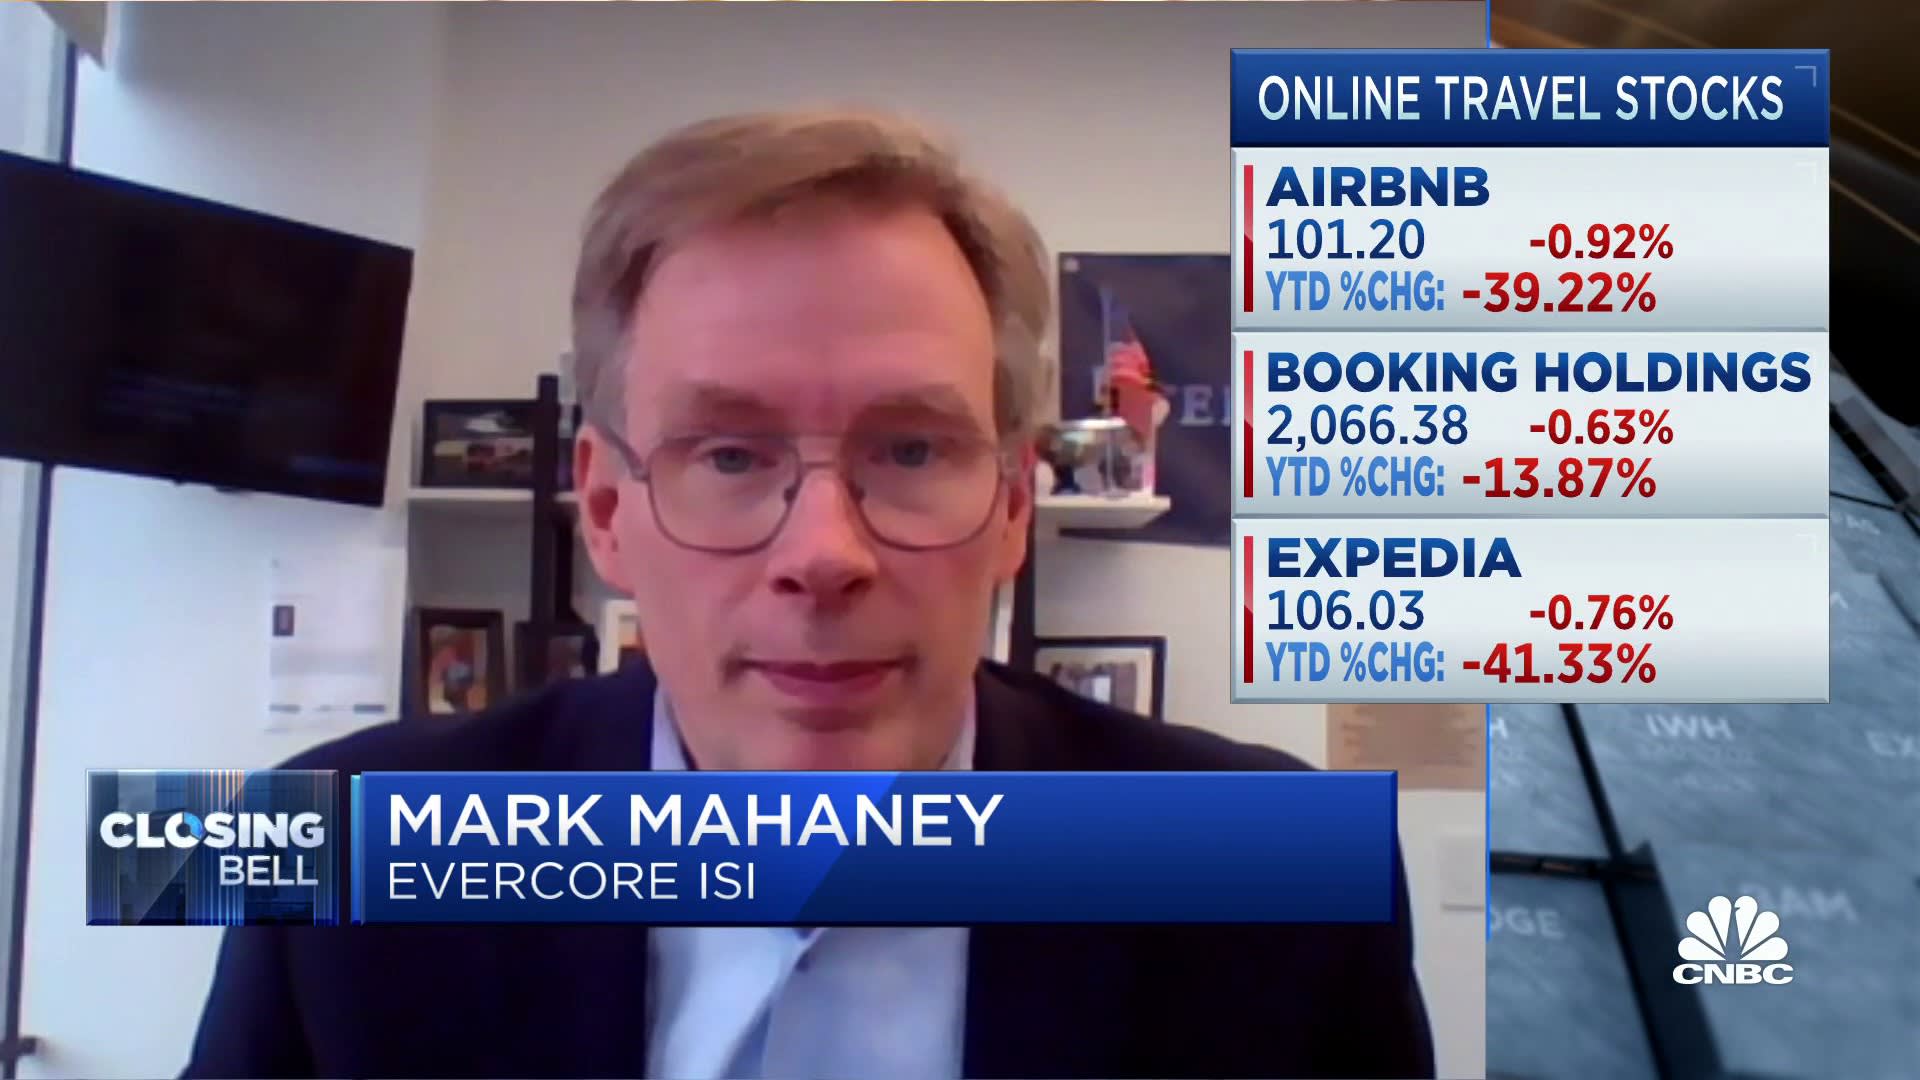 Travel companies cutting costs early makes them attractive, says Evercore's Mark Mahaney